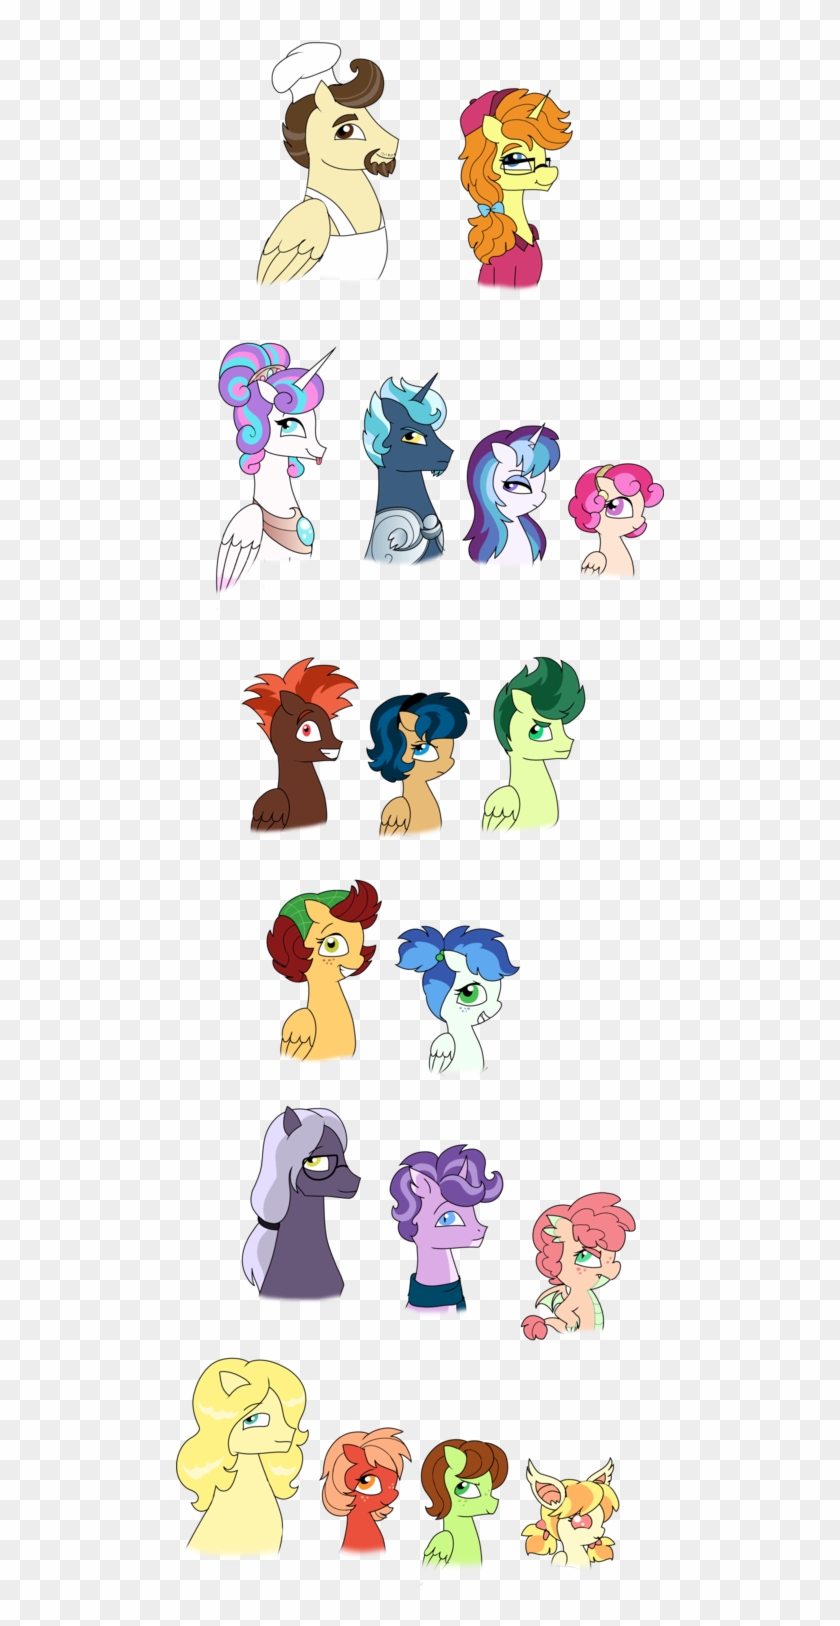 The Siblings By Purfectprincessgirl - My Little Pony: Friendship Is Magic #439736